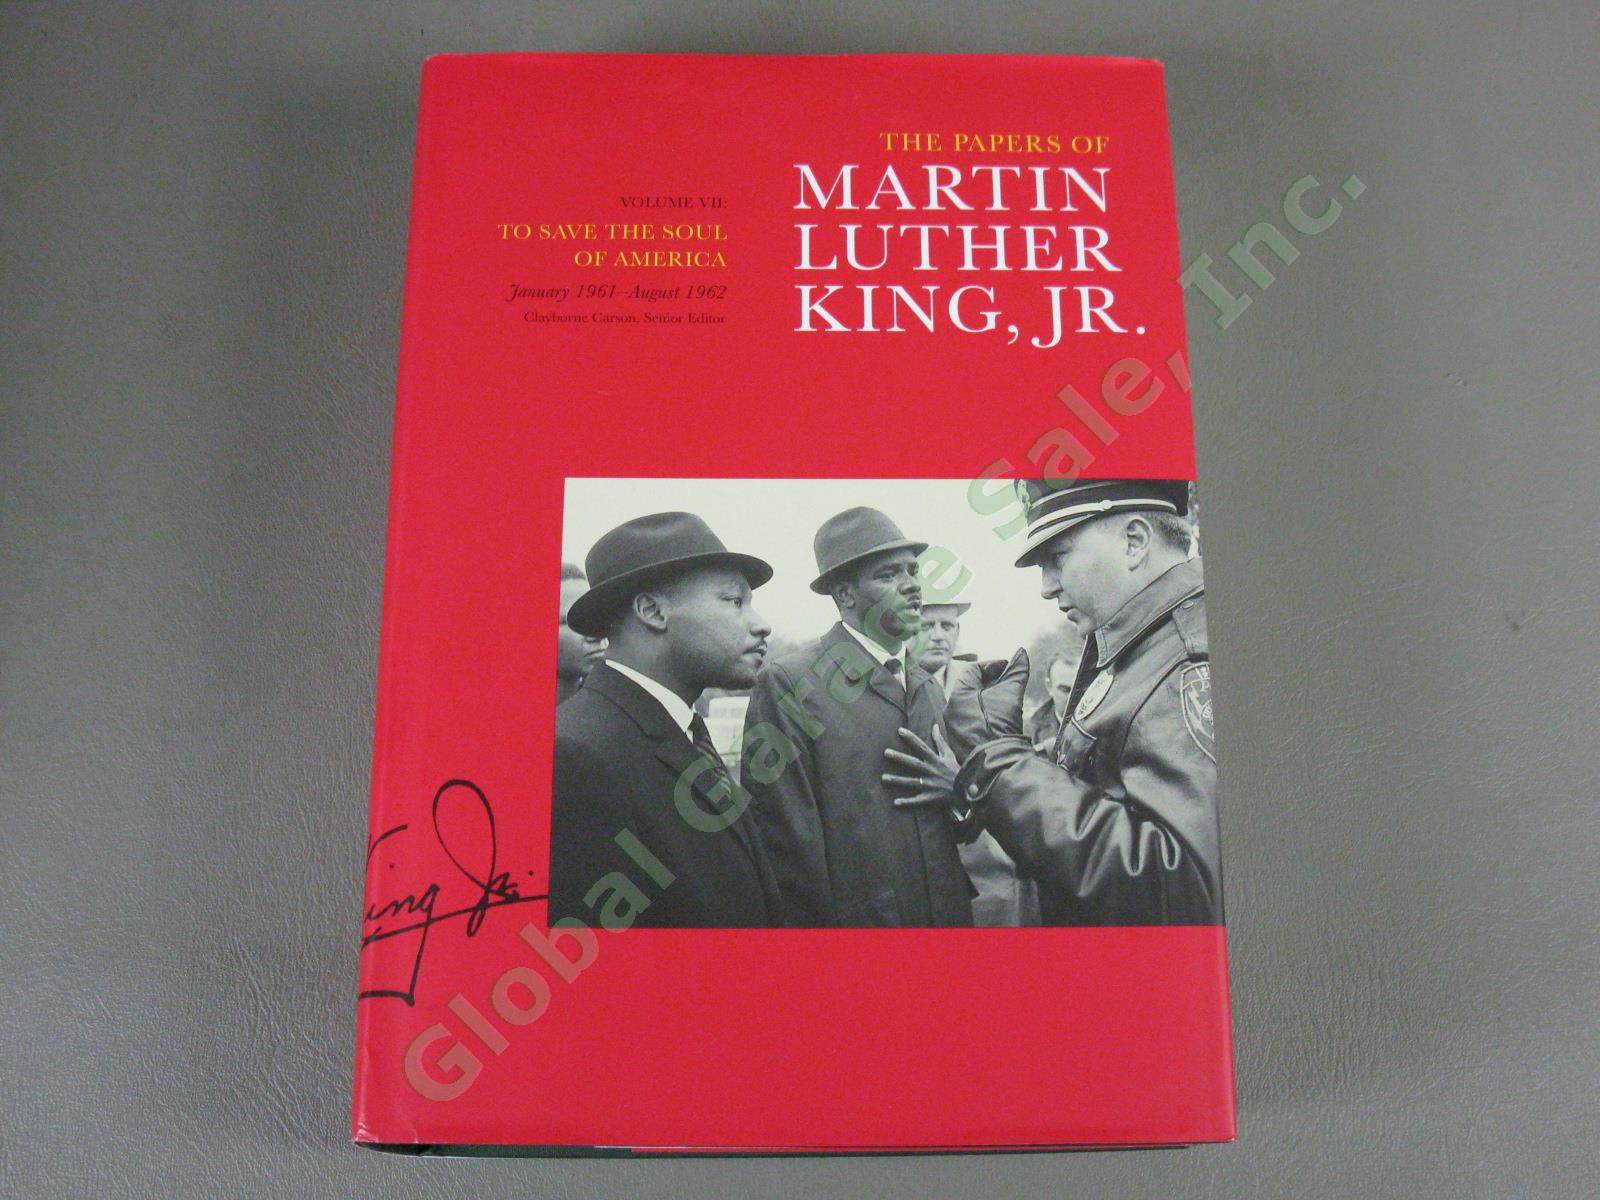 MINT! Never Read! Papers of Martin Luther King Jr Volumes I-VII Rare Full Set! 9